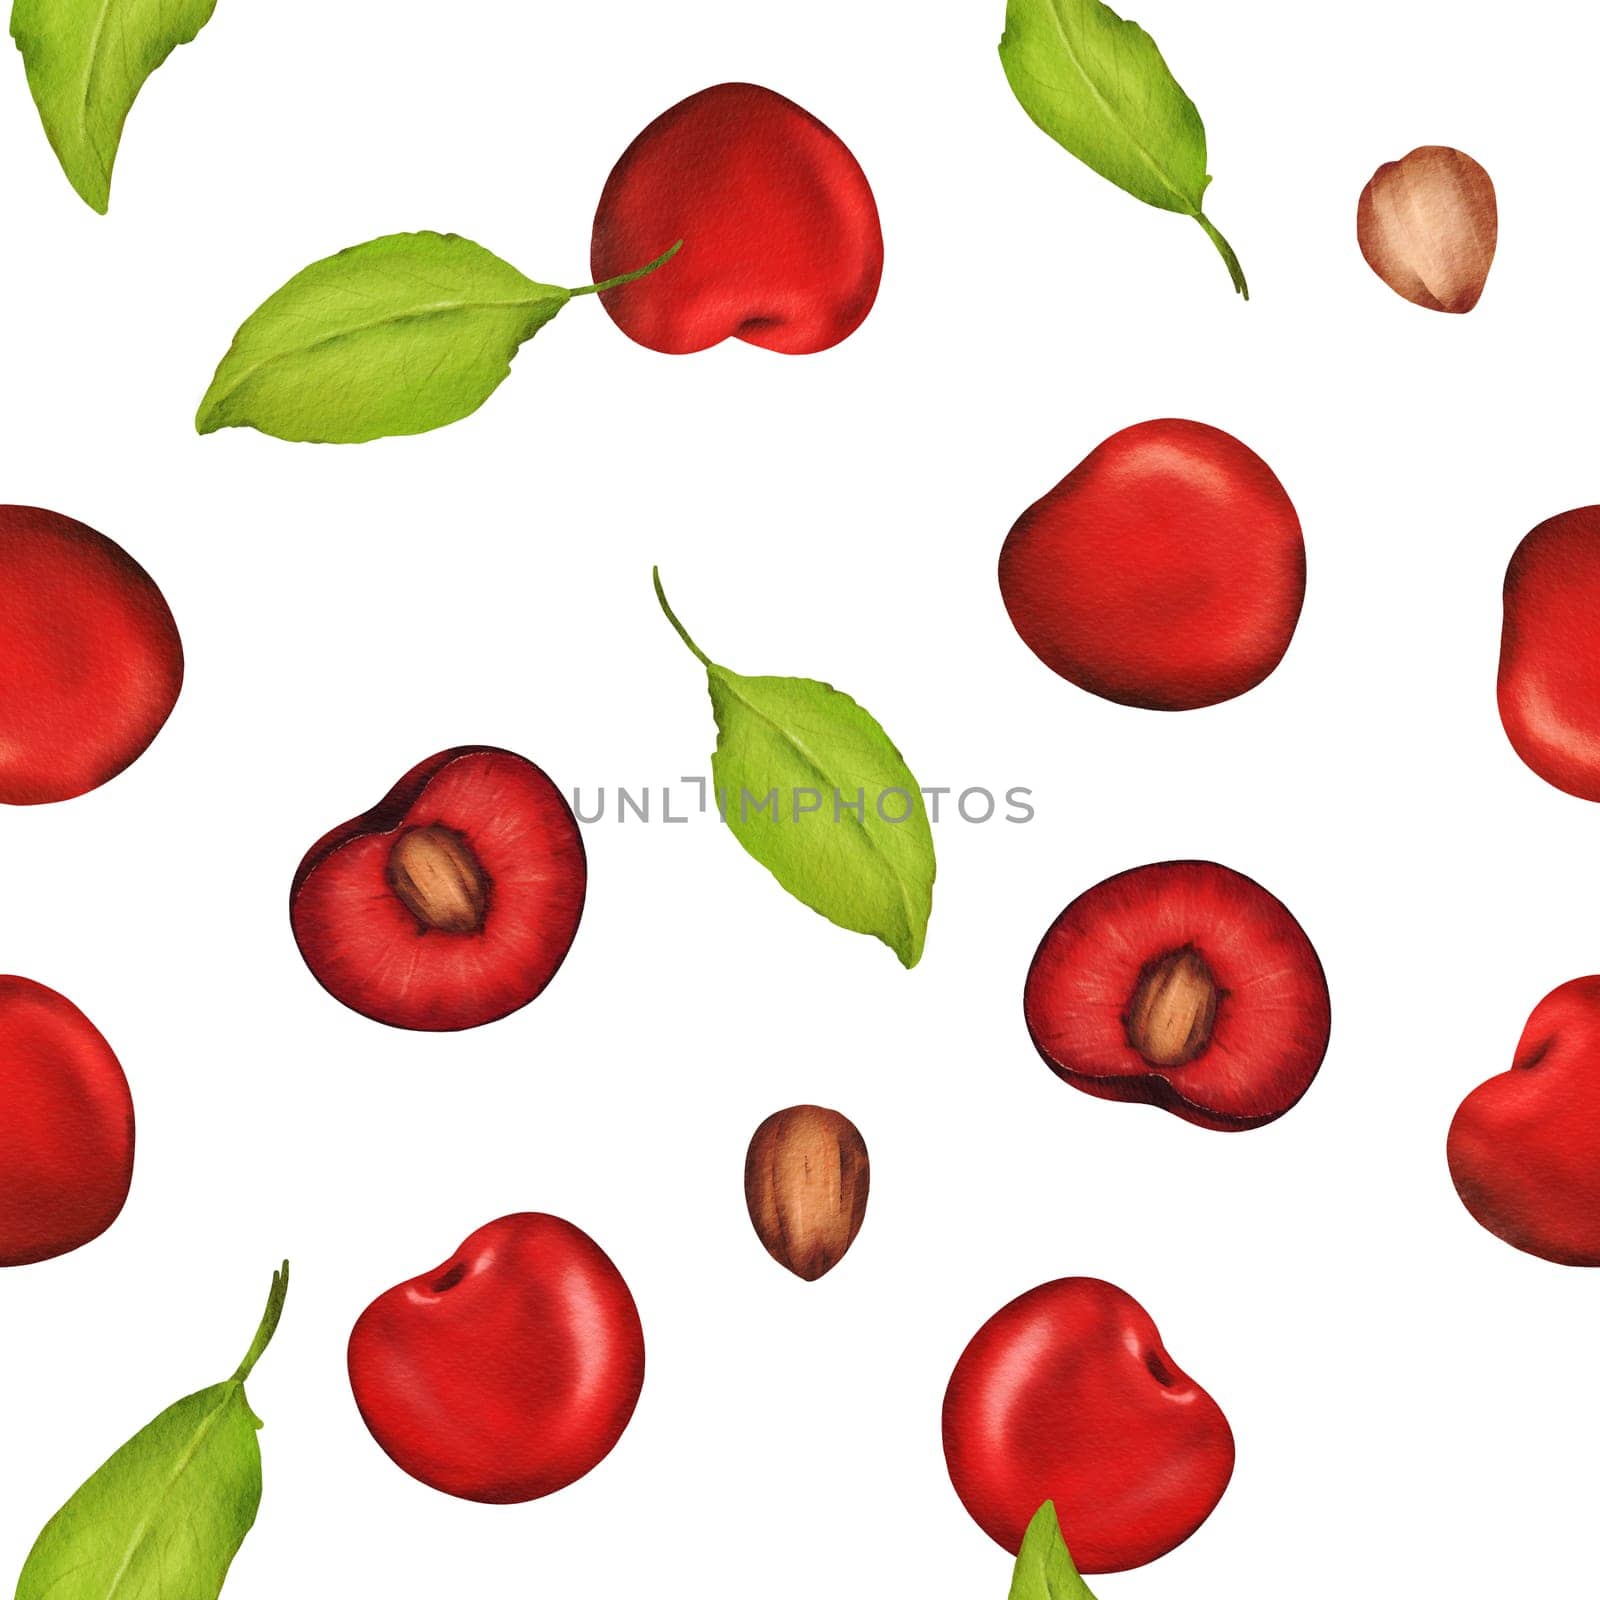 Seamless watercolor pattern with luscious cherries, perfect for kitchen decor, recipes, textiles, jam labels, aprons, packaging, juices, cherry-flavored sweets, and gum wrappers by Art_Mari_Ka